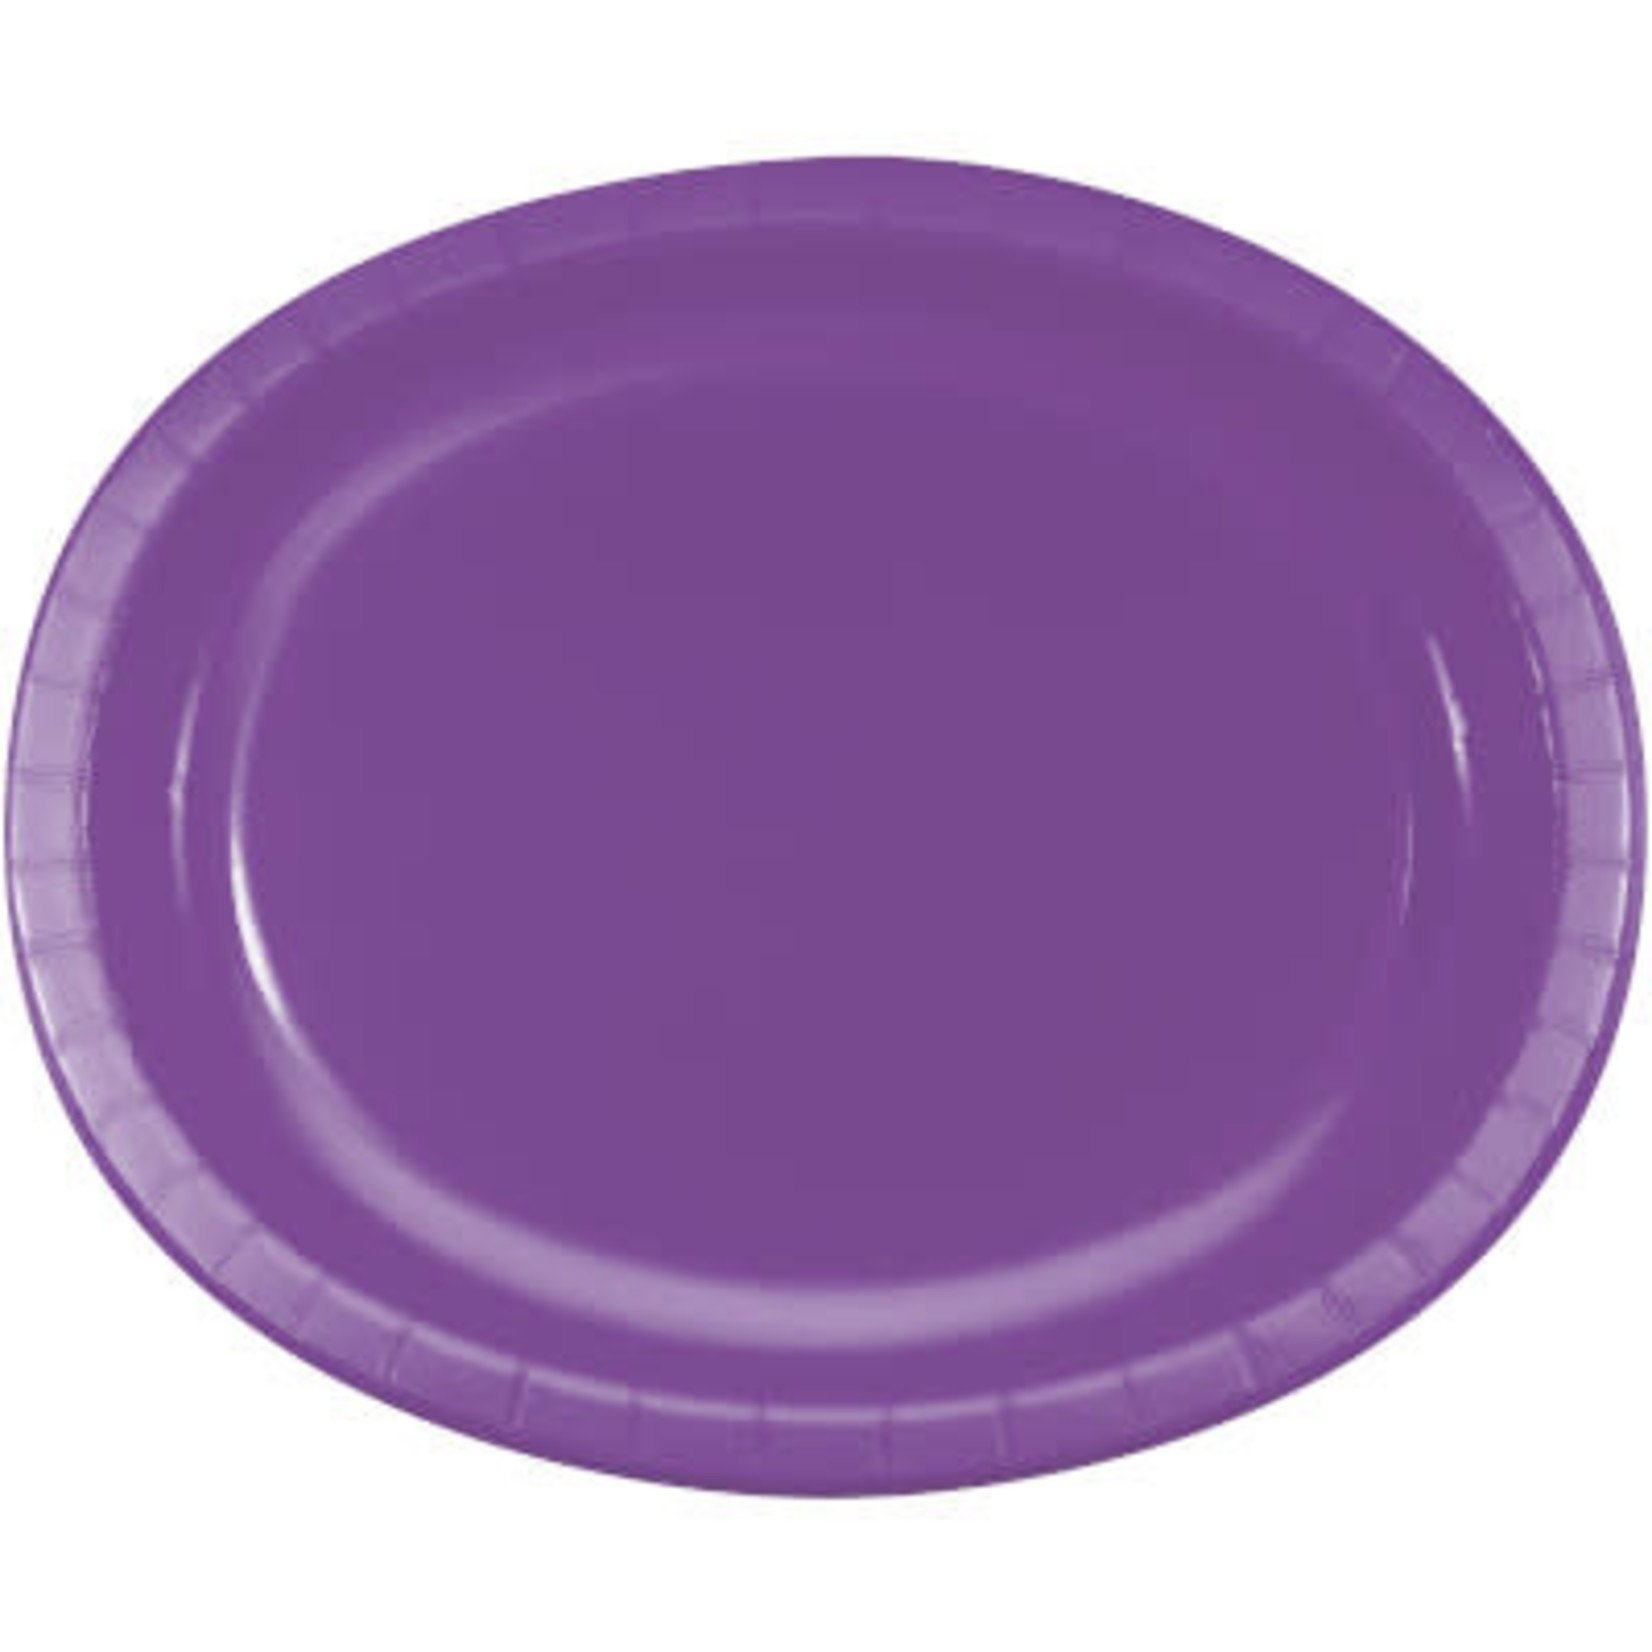 Touch of Color 10" x 12" Amethyst Purple Oval Paper Plates - 8ct.